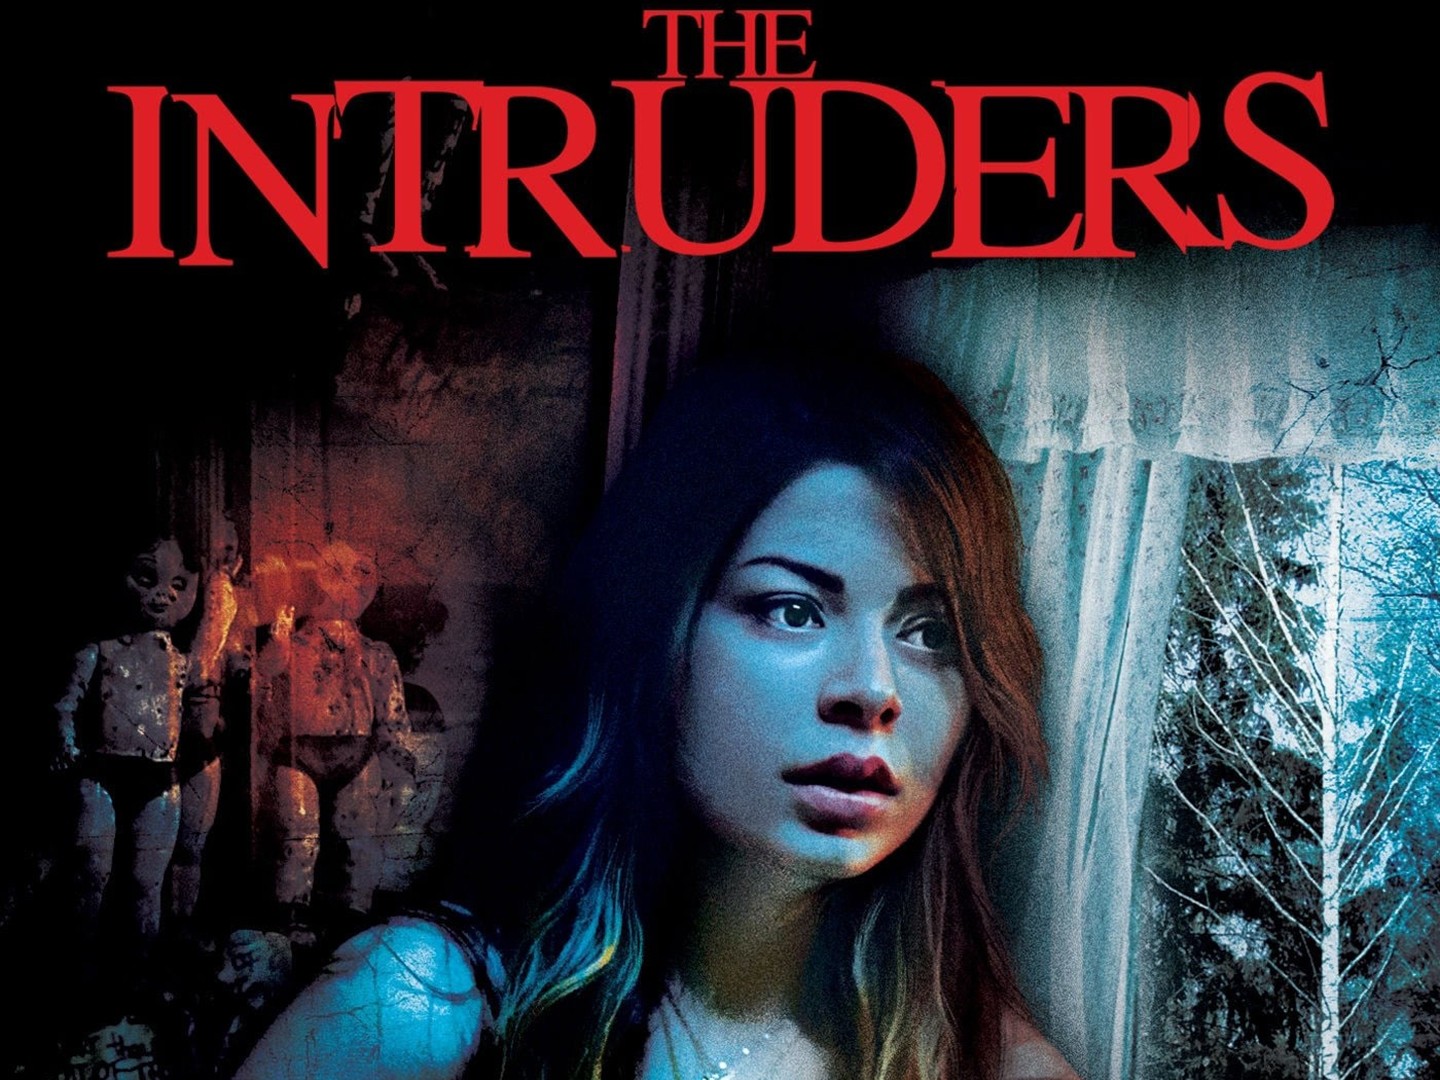 The Intruder - Rotten Tomatoes